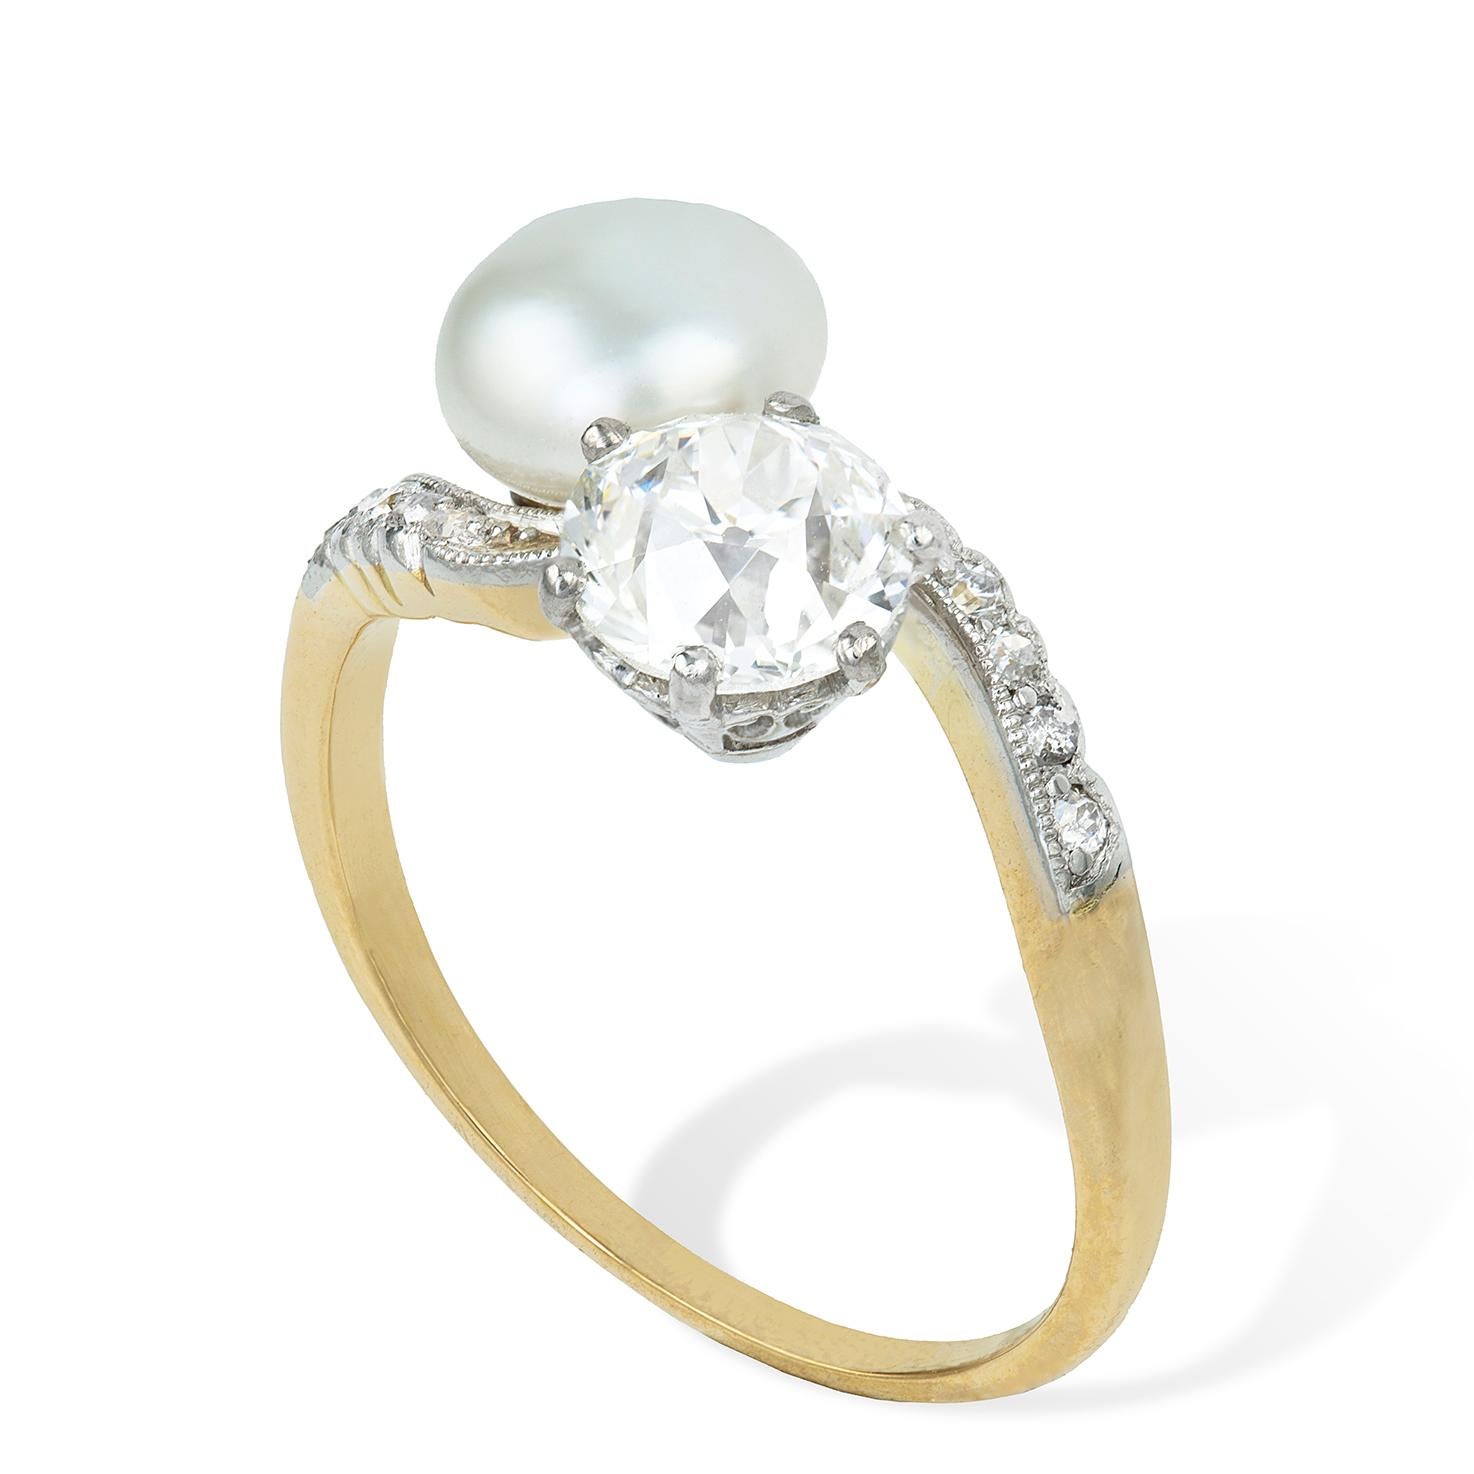 An Edwardian natural pearl and diamond cross over ring, the natural pearl weighing 1.54 carats, accompanied by GCS Report, set in cross over style with an old brilliant-cut diamond, weighing 0.94 carats, to curved diamond-set shoulders, all set in